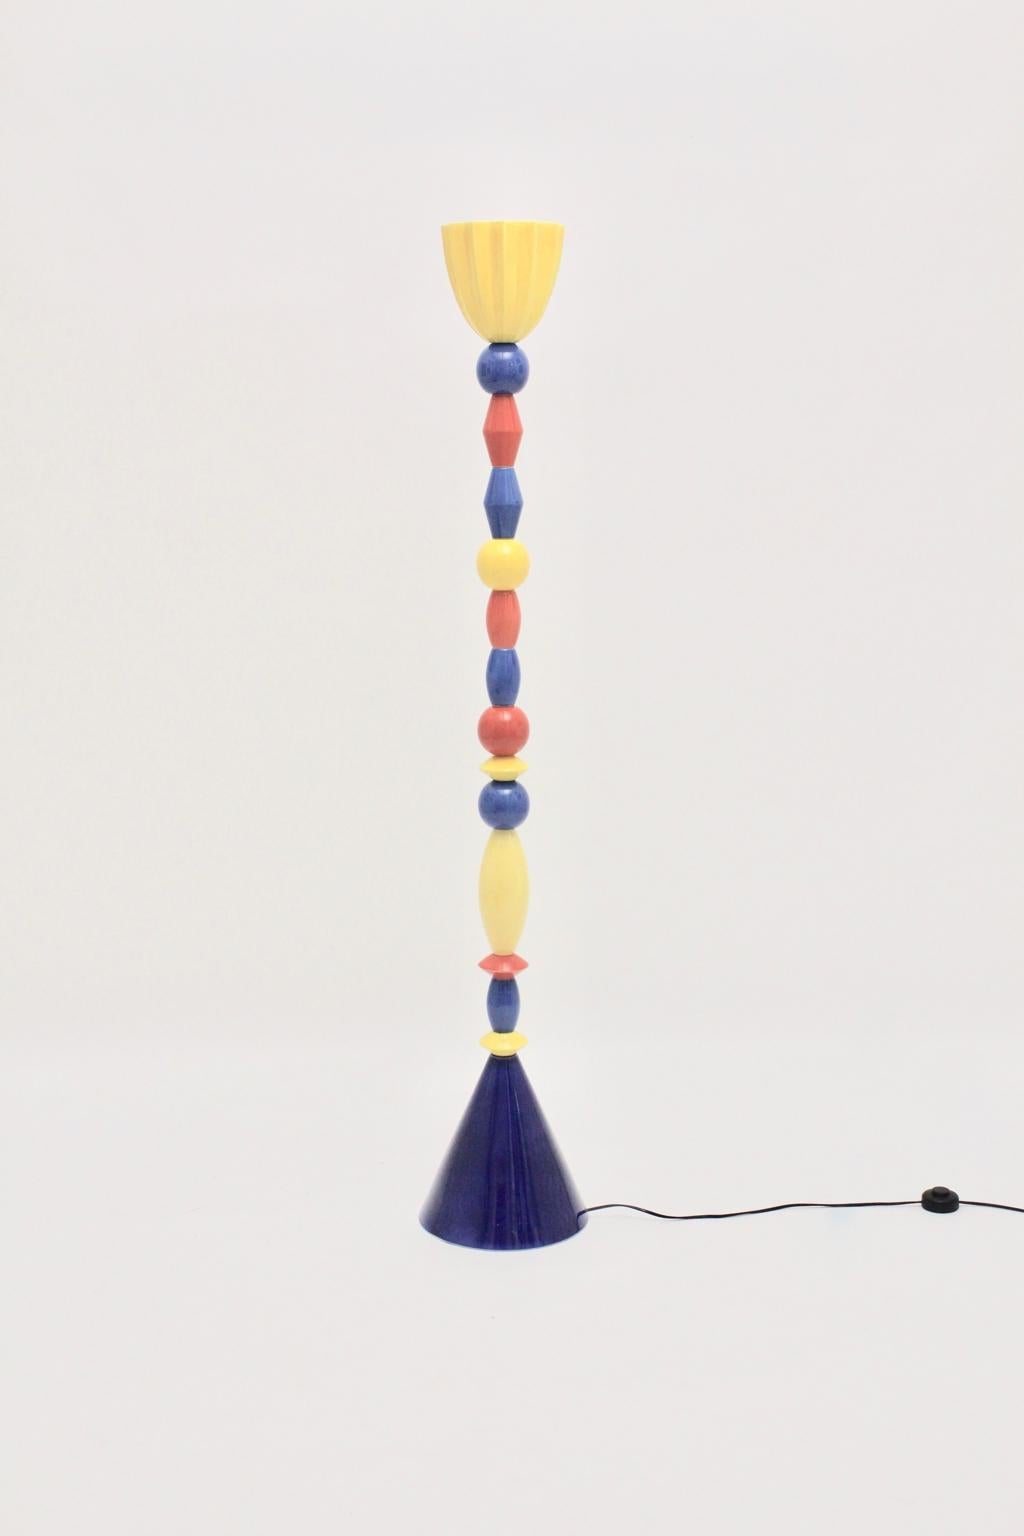 Post-Modern Multicolored Vintage Ceramic Floor Lamp Italy 1980 in Style of Ettore Sottsass